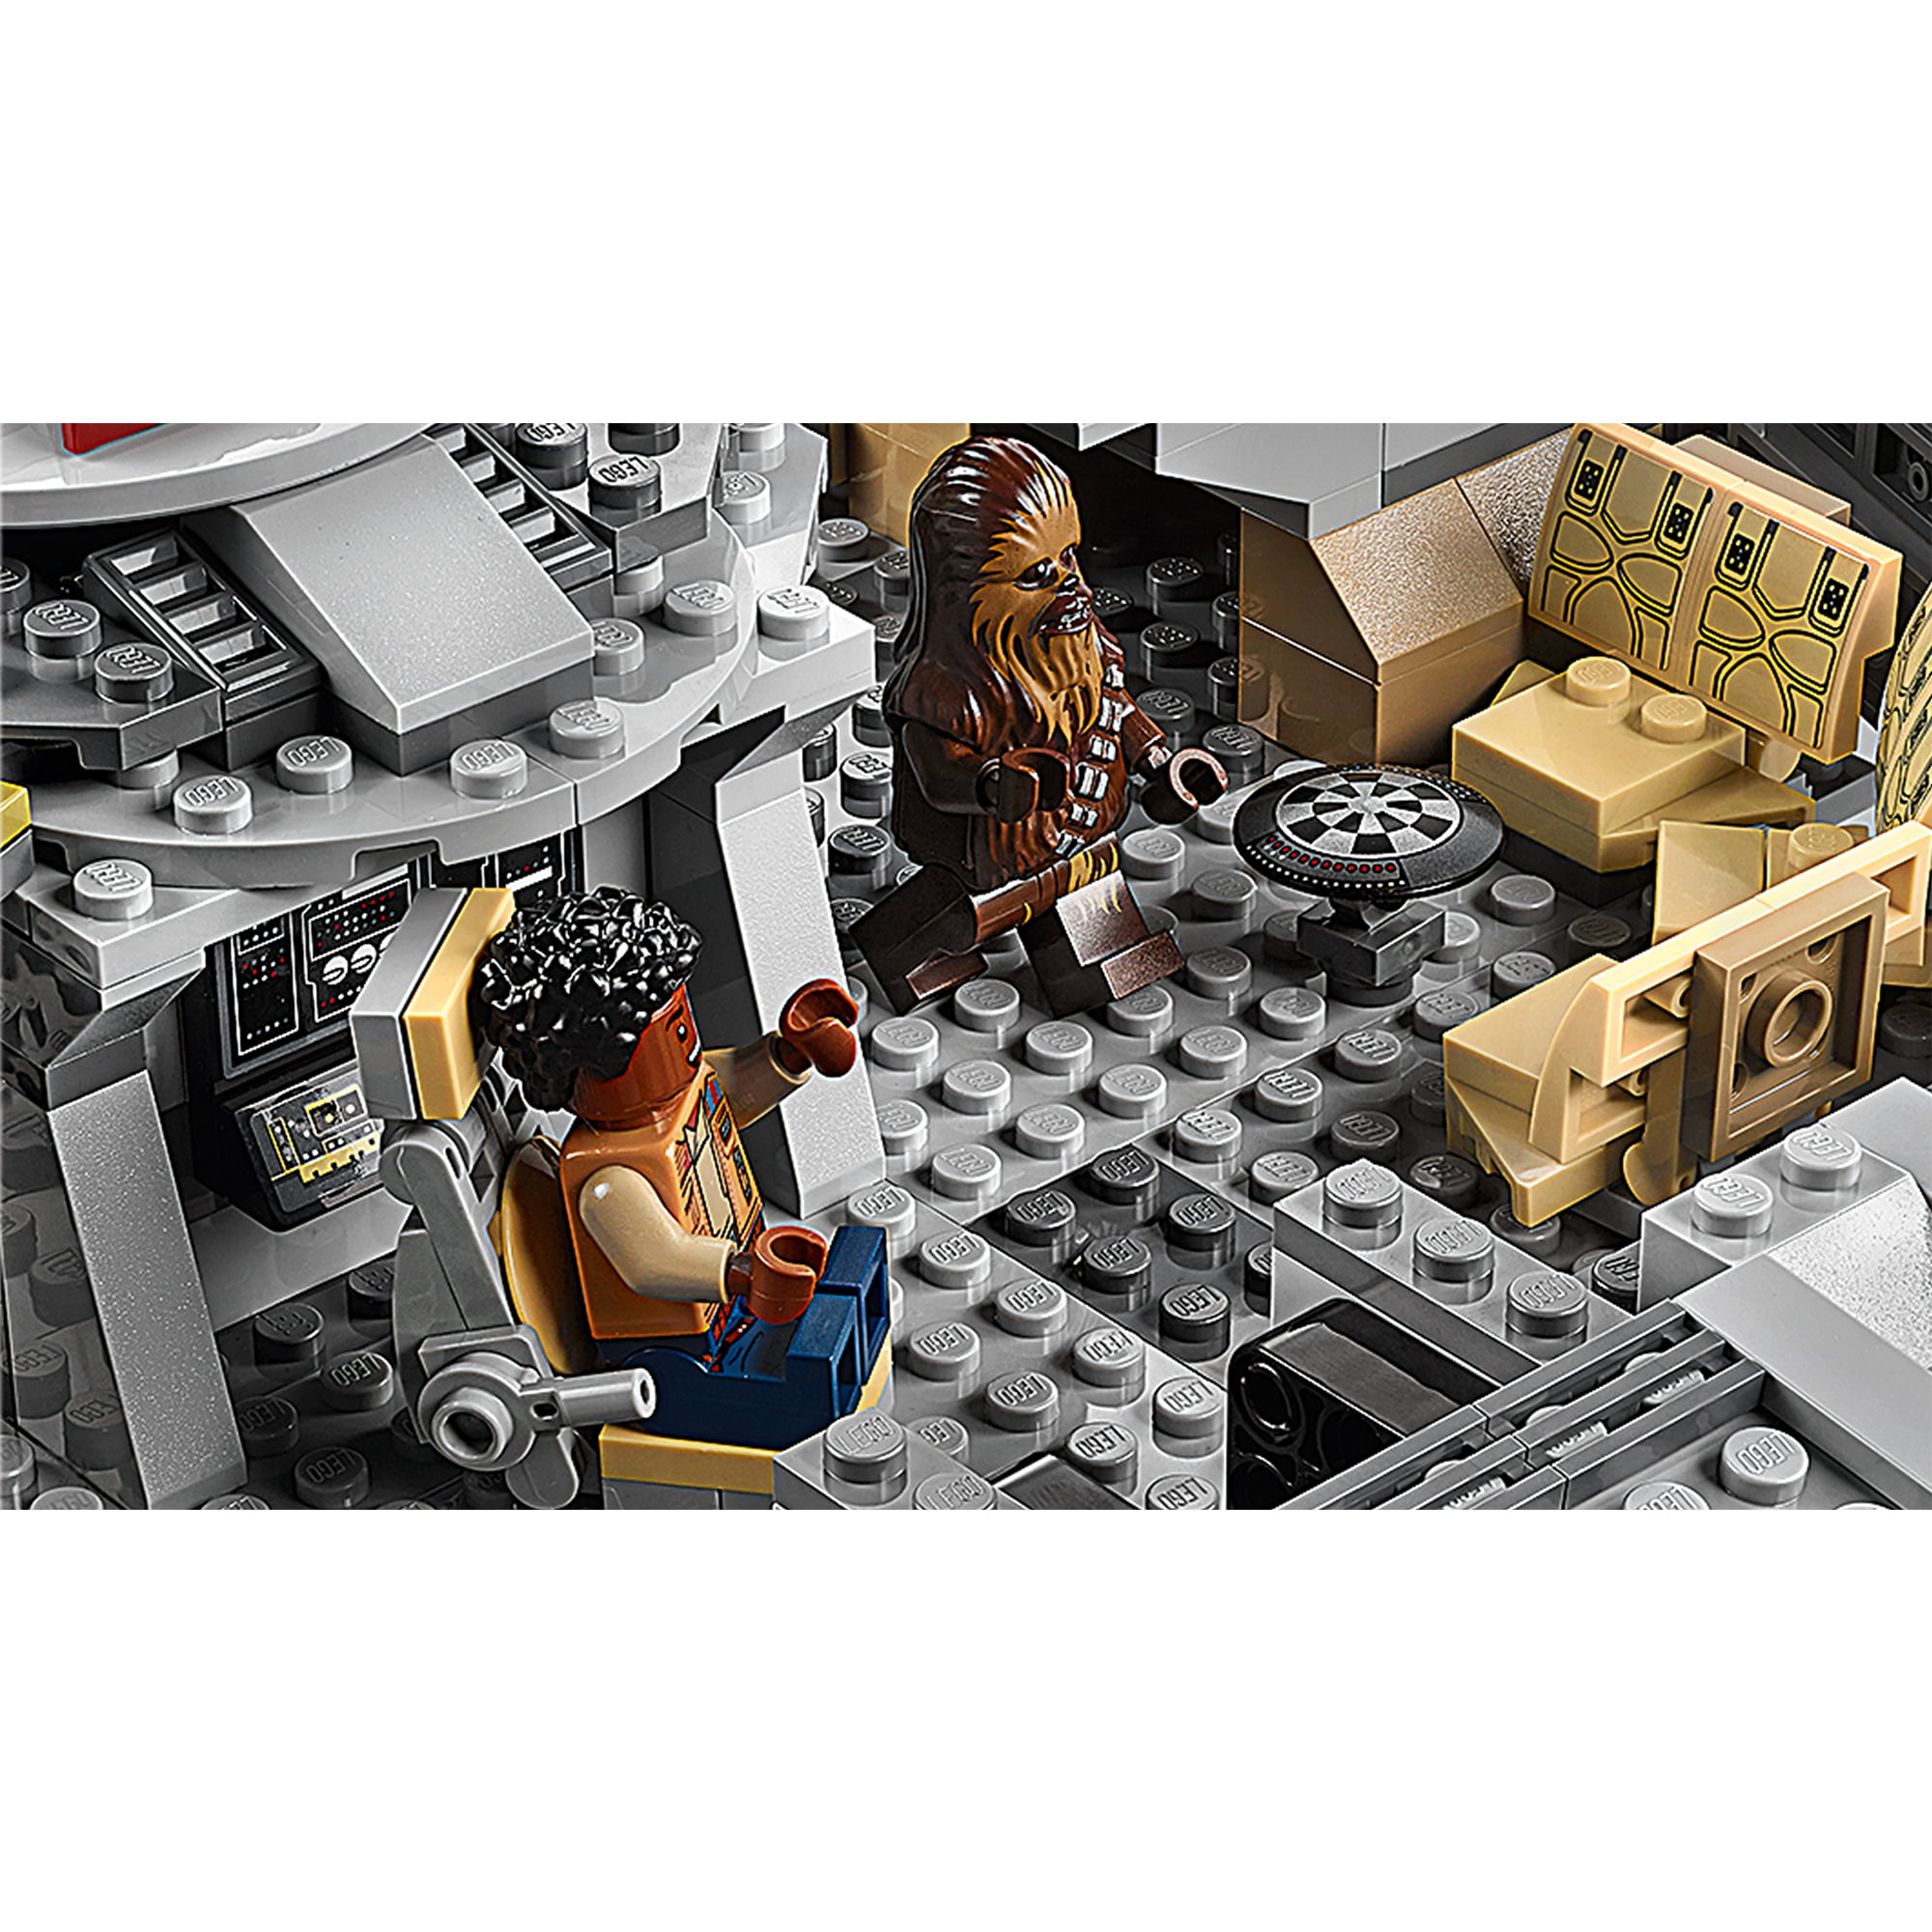  LEGO Star Wars Millennium Falcon 75257 Building Set - Starship  Model with Finn, Chewbacca, Lando Calrissian, Boolio, C-3PO, R2-D2, and D-O  Minifigures, The Rise of Skywalker Movie Collection : Toys 